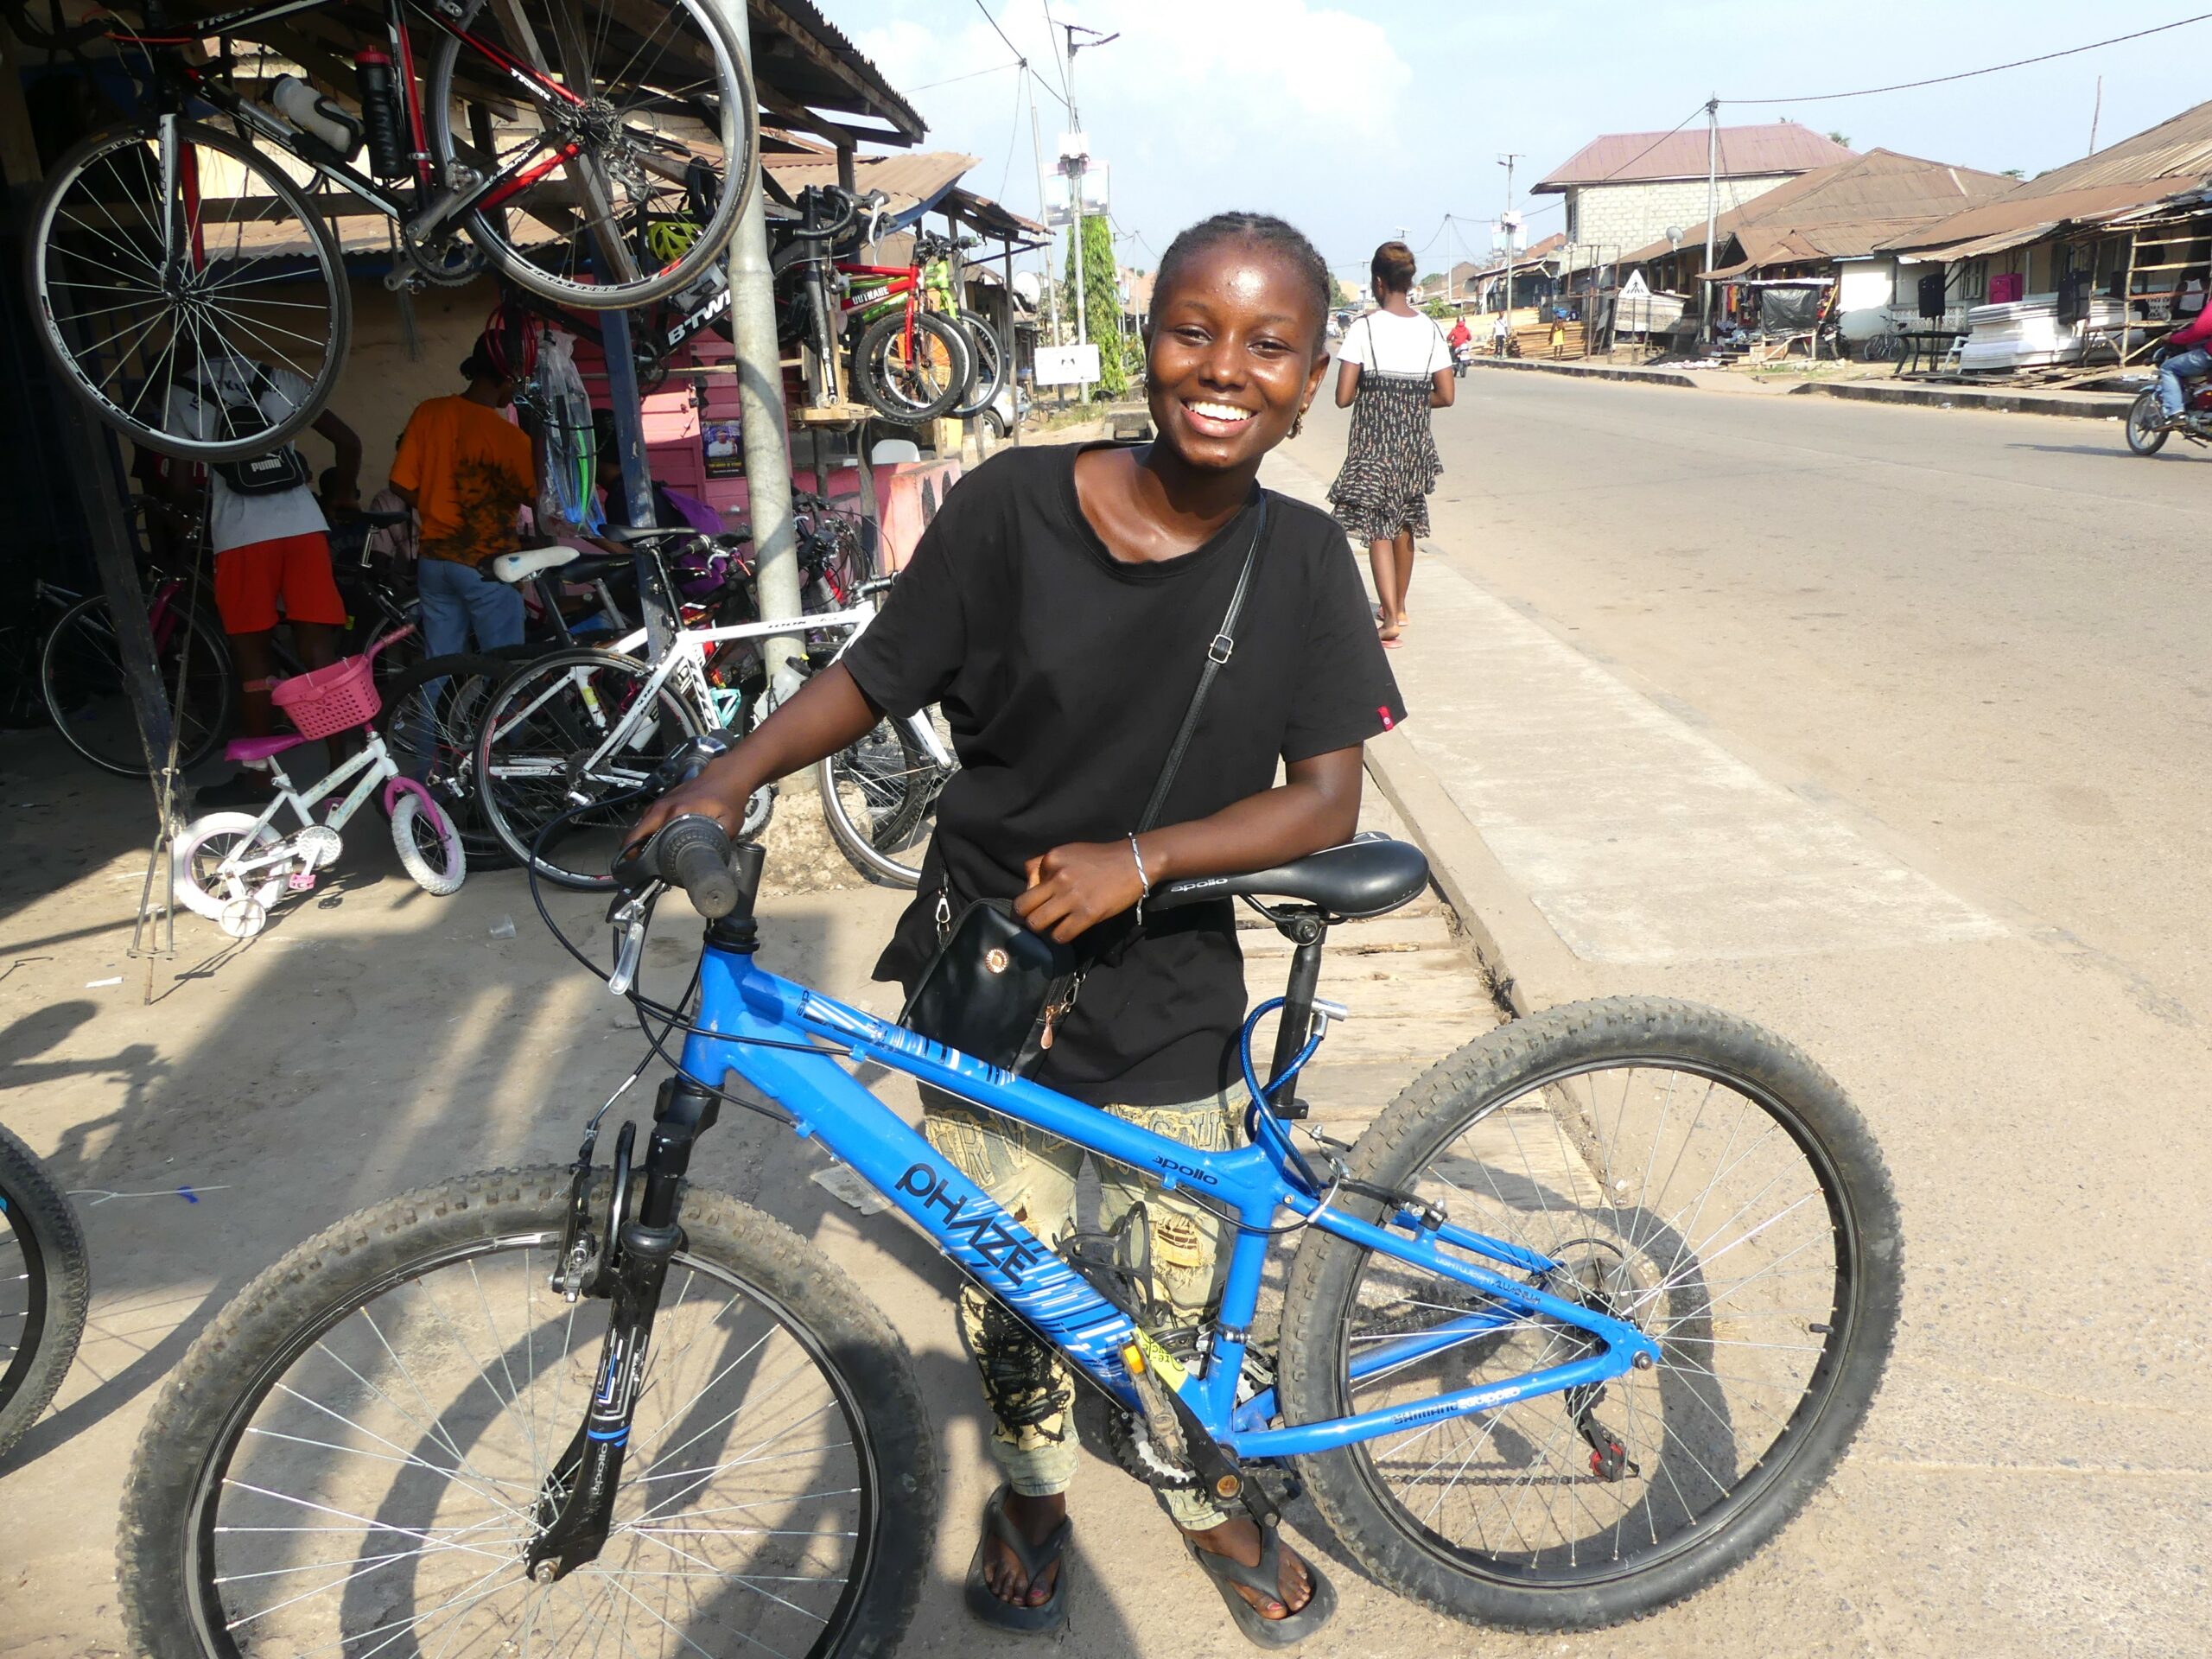 Sierra Leone Bicycle
Re-Cycle Bikes to Africa
Changing Lives Transport